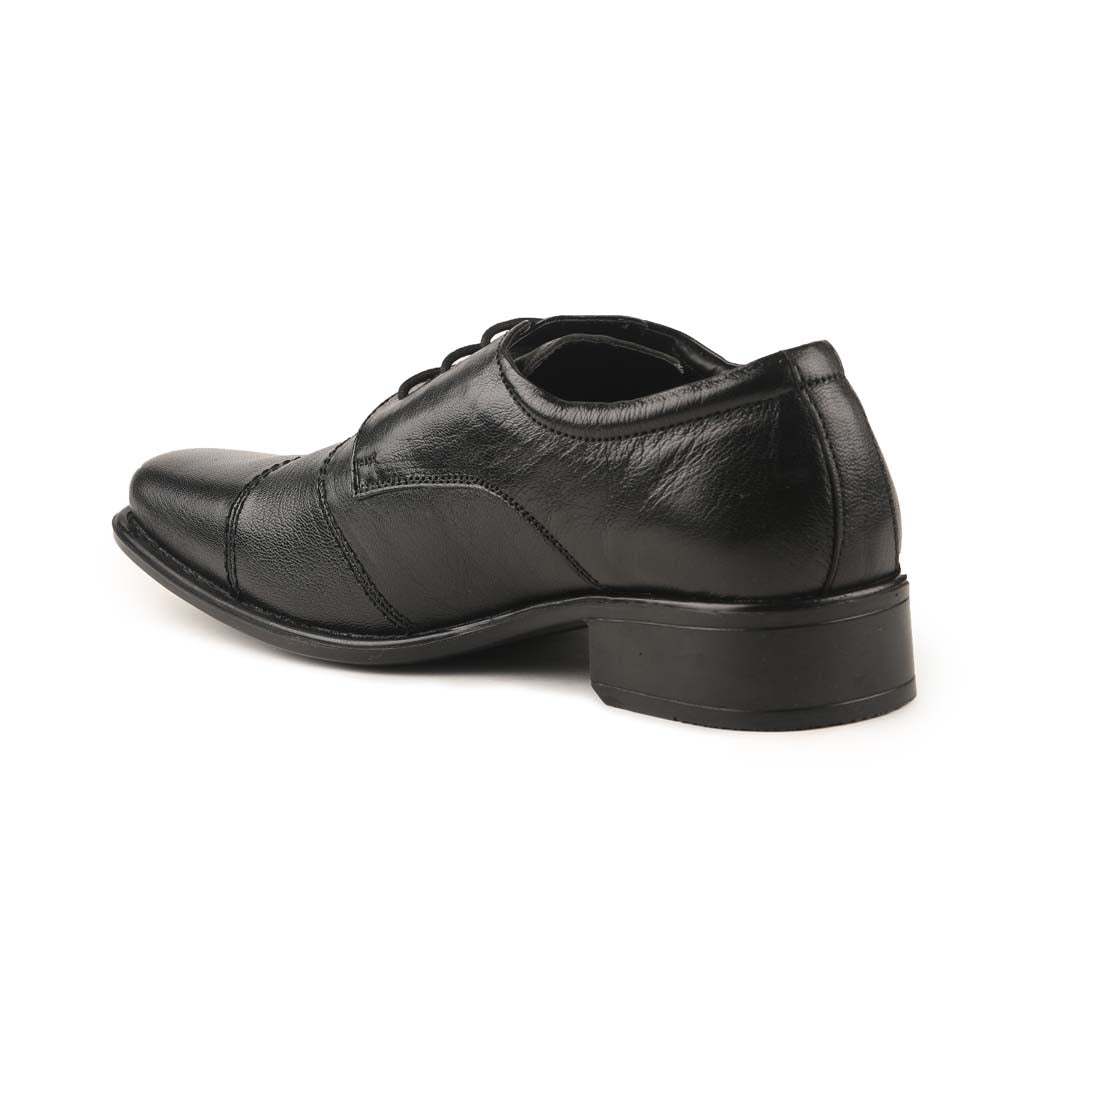 Paragon  RL9809G Men Formal Shoes | Corporate Office Shoes | Smart &amp; Sleek Design | Comfortable Sole with Cushioning | For Daily &amp; Occasion Wear